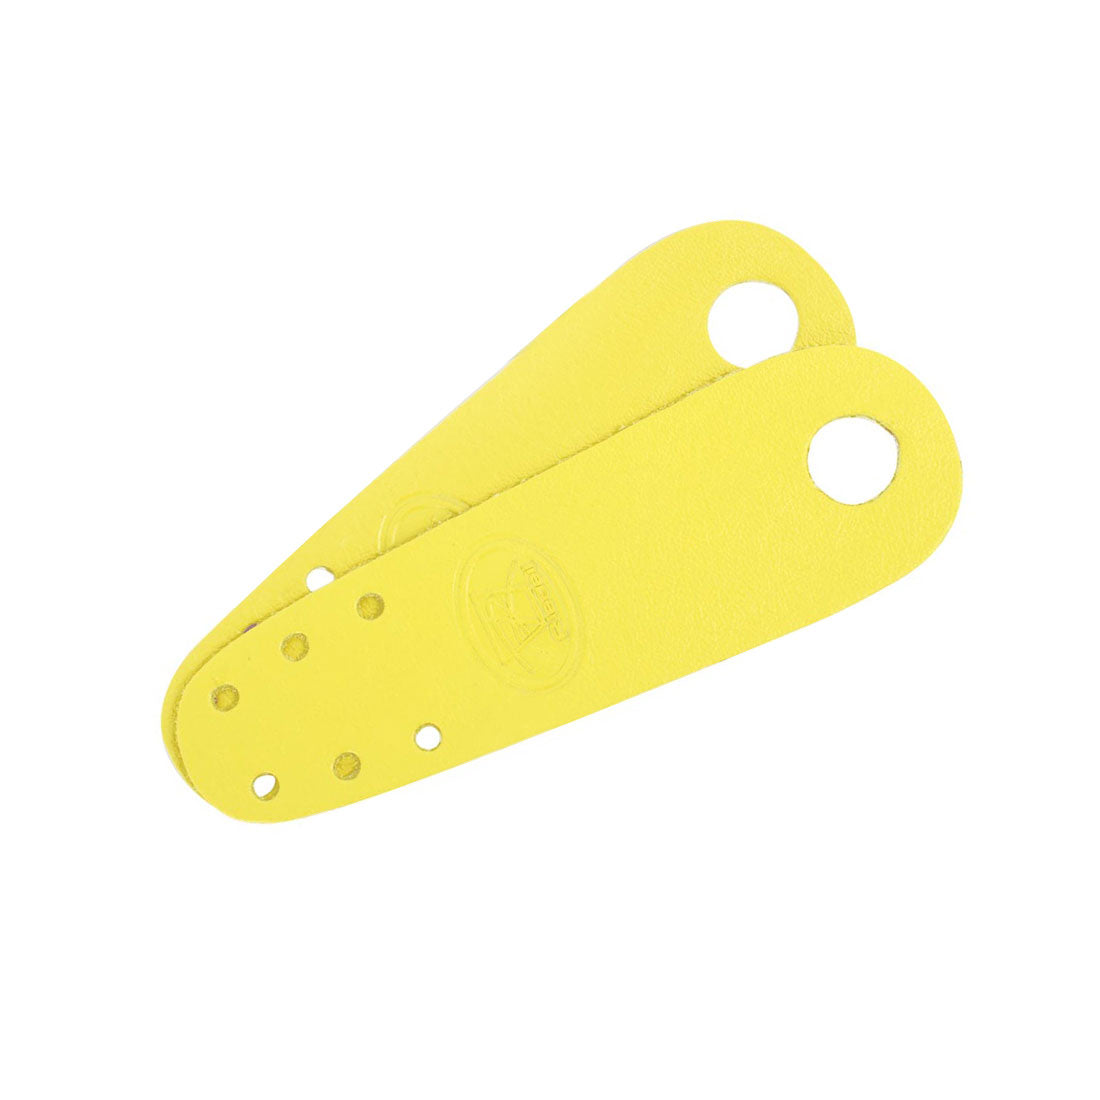 Riedell Flat Toe Guards 2pk - Leather Yellow Roller Skate Hardware and Parts